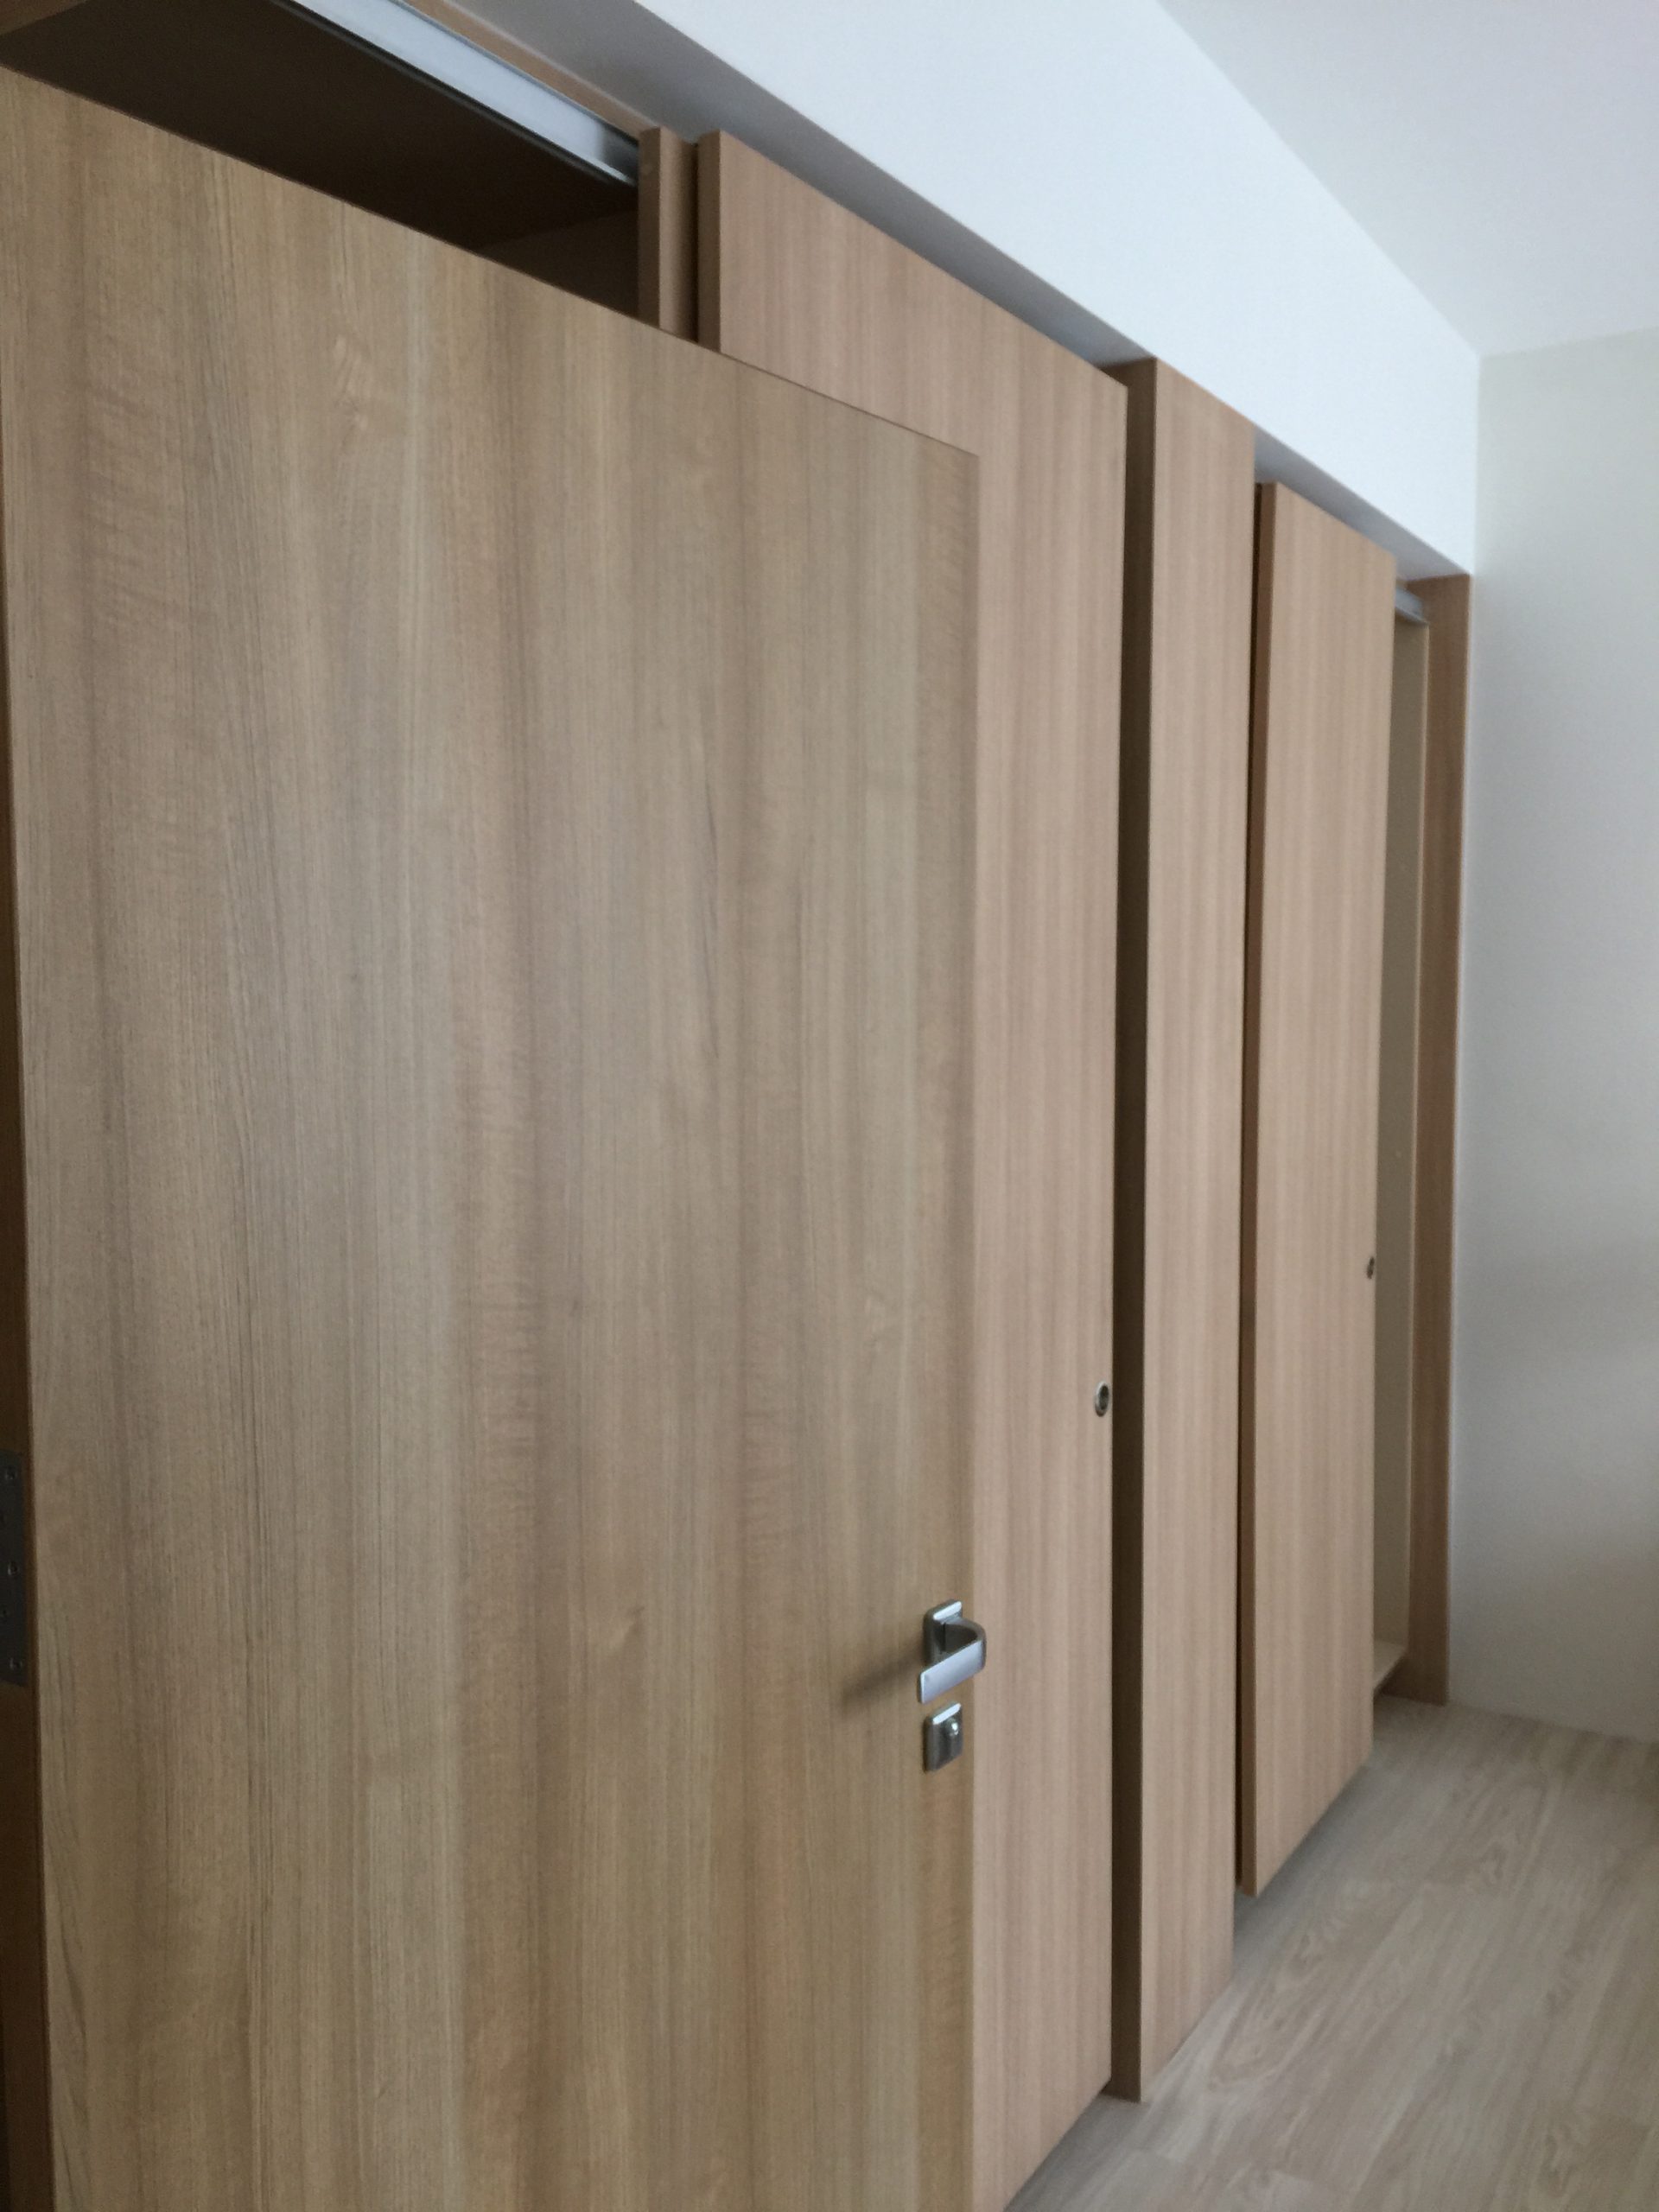 astar furnishing commercial project cabinet 6. HC suites 45 scaled